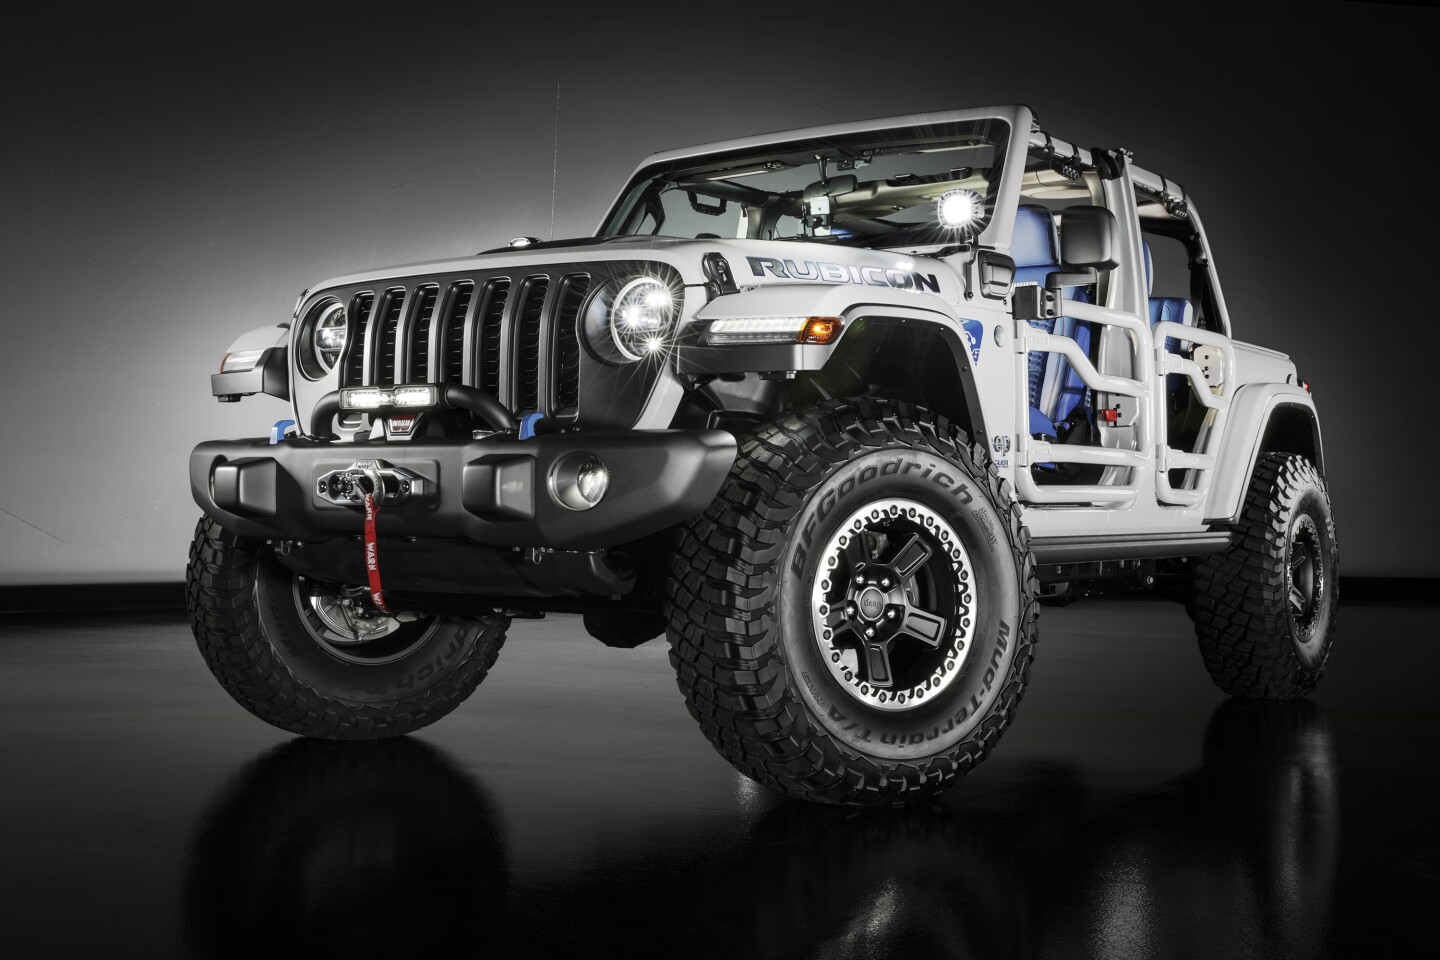 The Jeep Wrangler 4xe concept adds the expected lift kit and larger tires, but also a custom light bracket to fit around the pillar-mounted plug